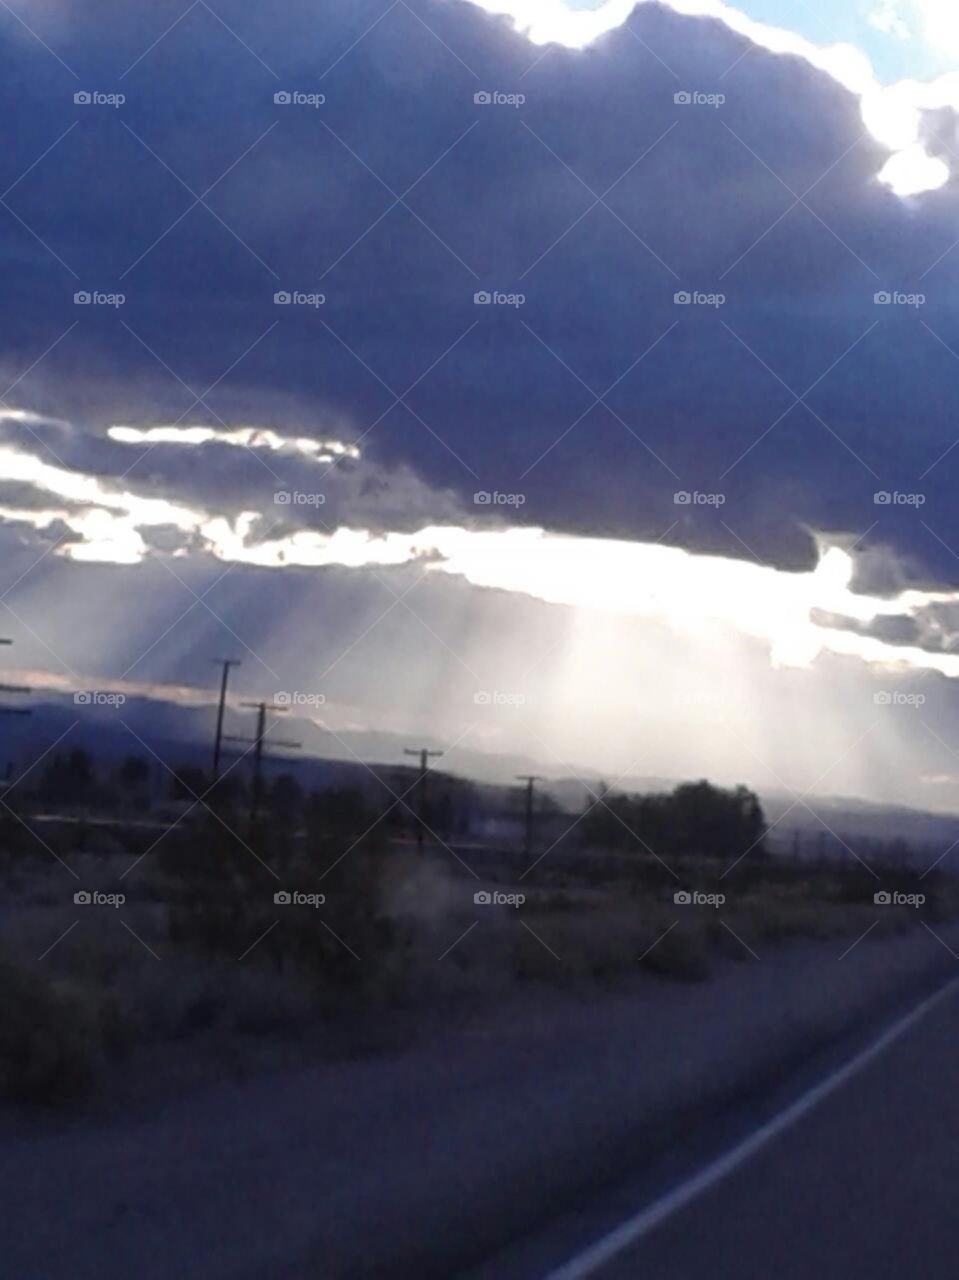 sunshine. the rays going through the clouds is just beautiful